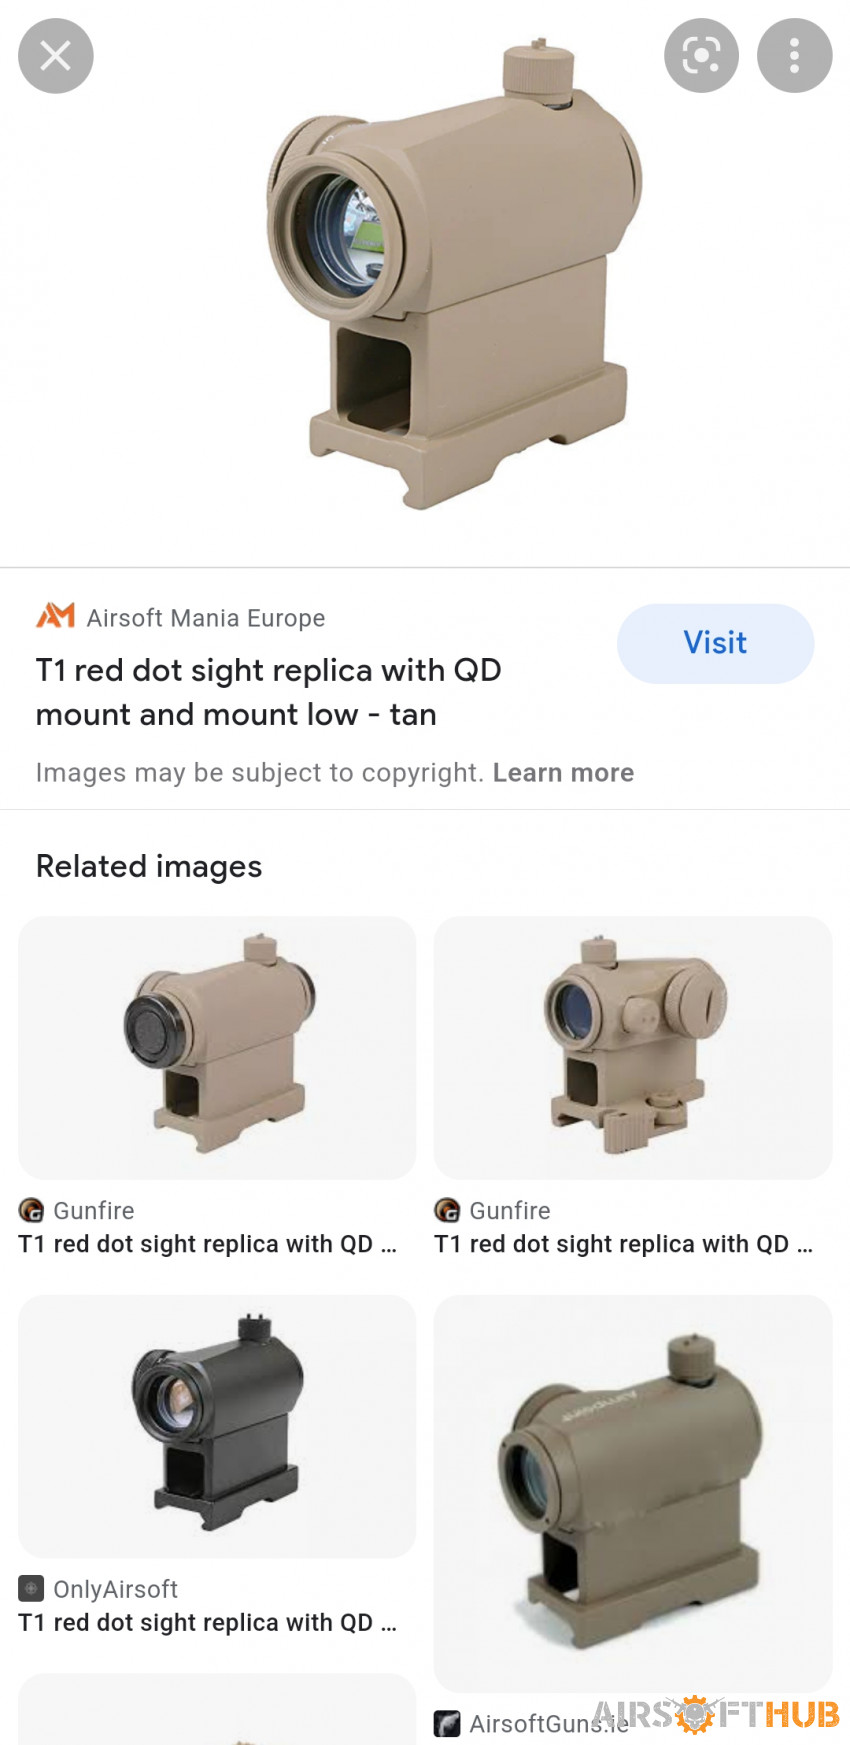 Looking for TAN RDS/Scope - Used airsoft equipment